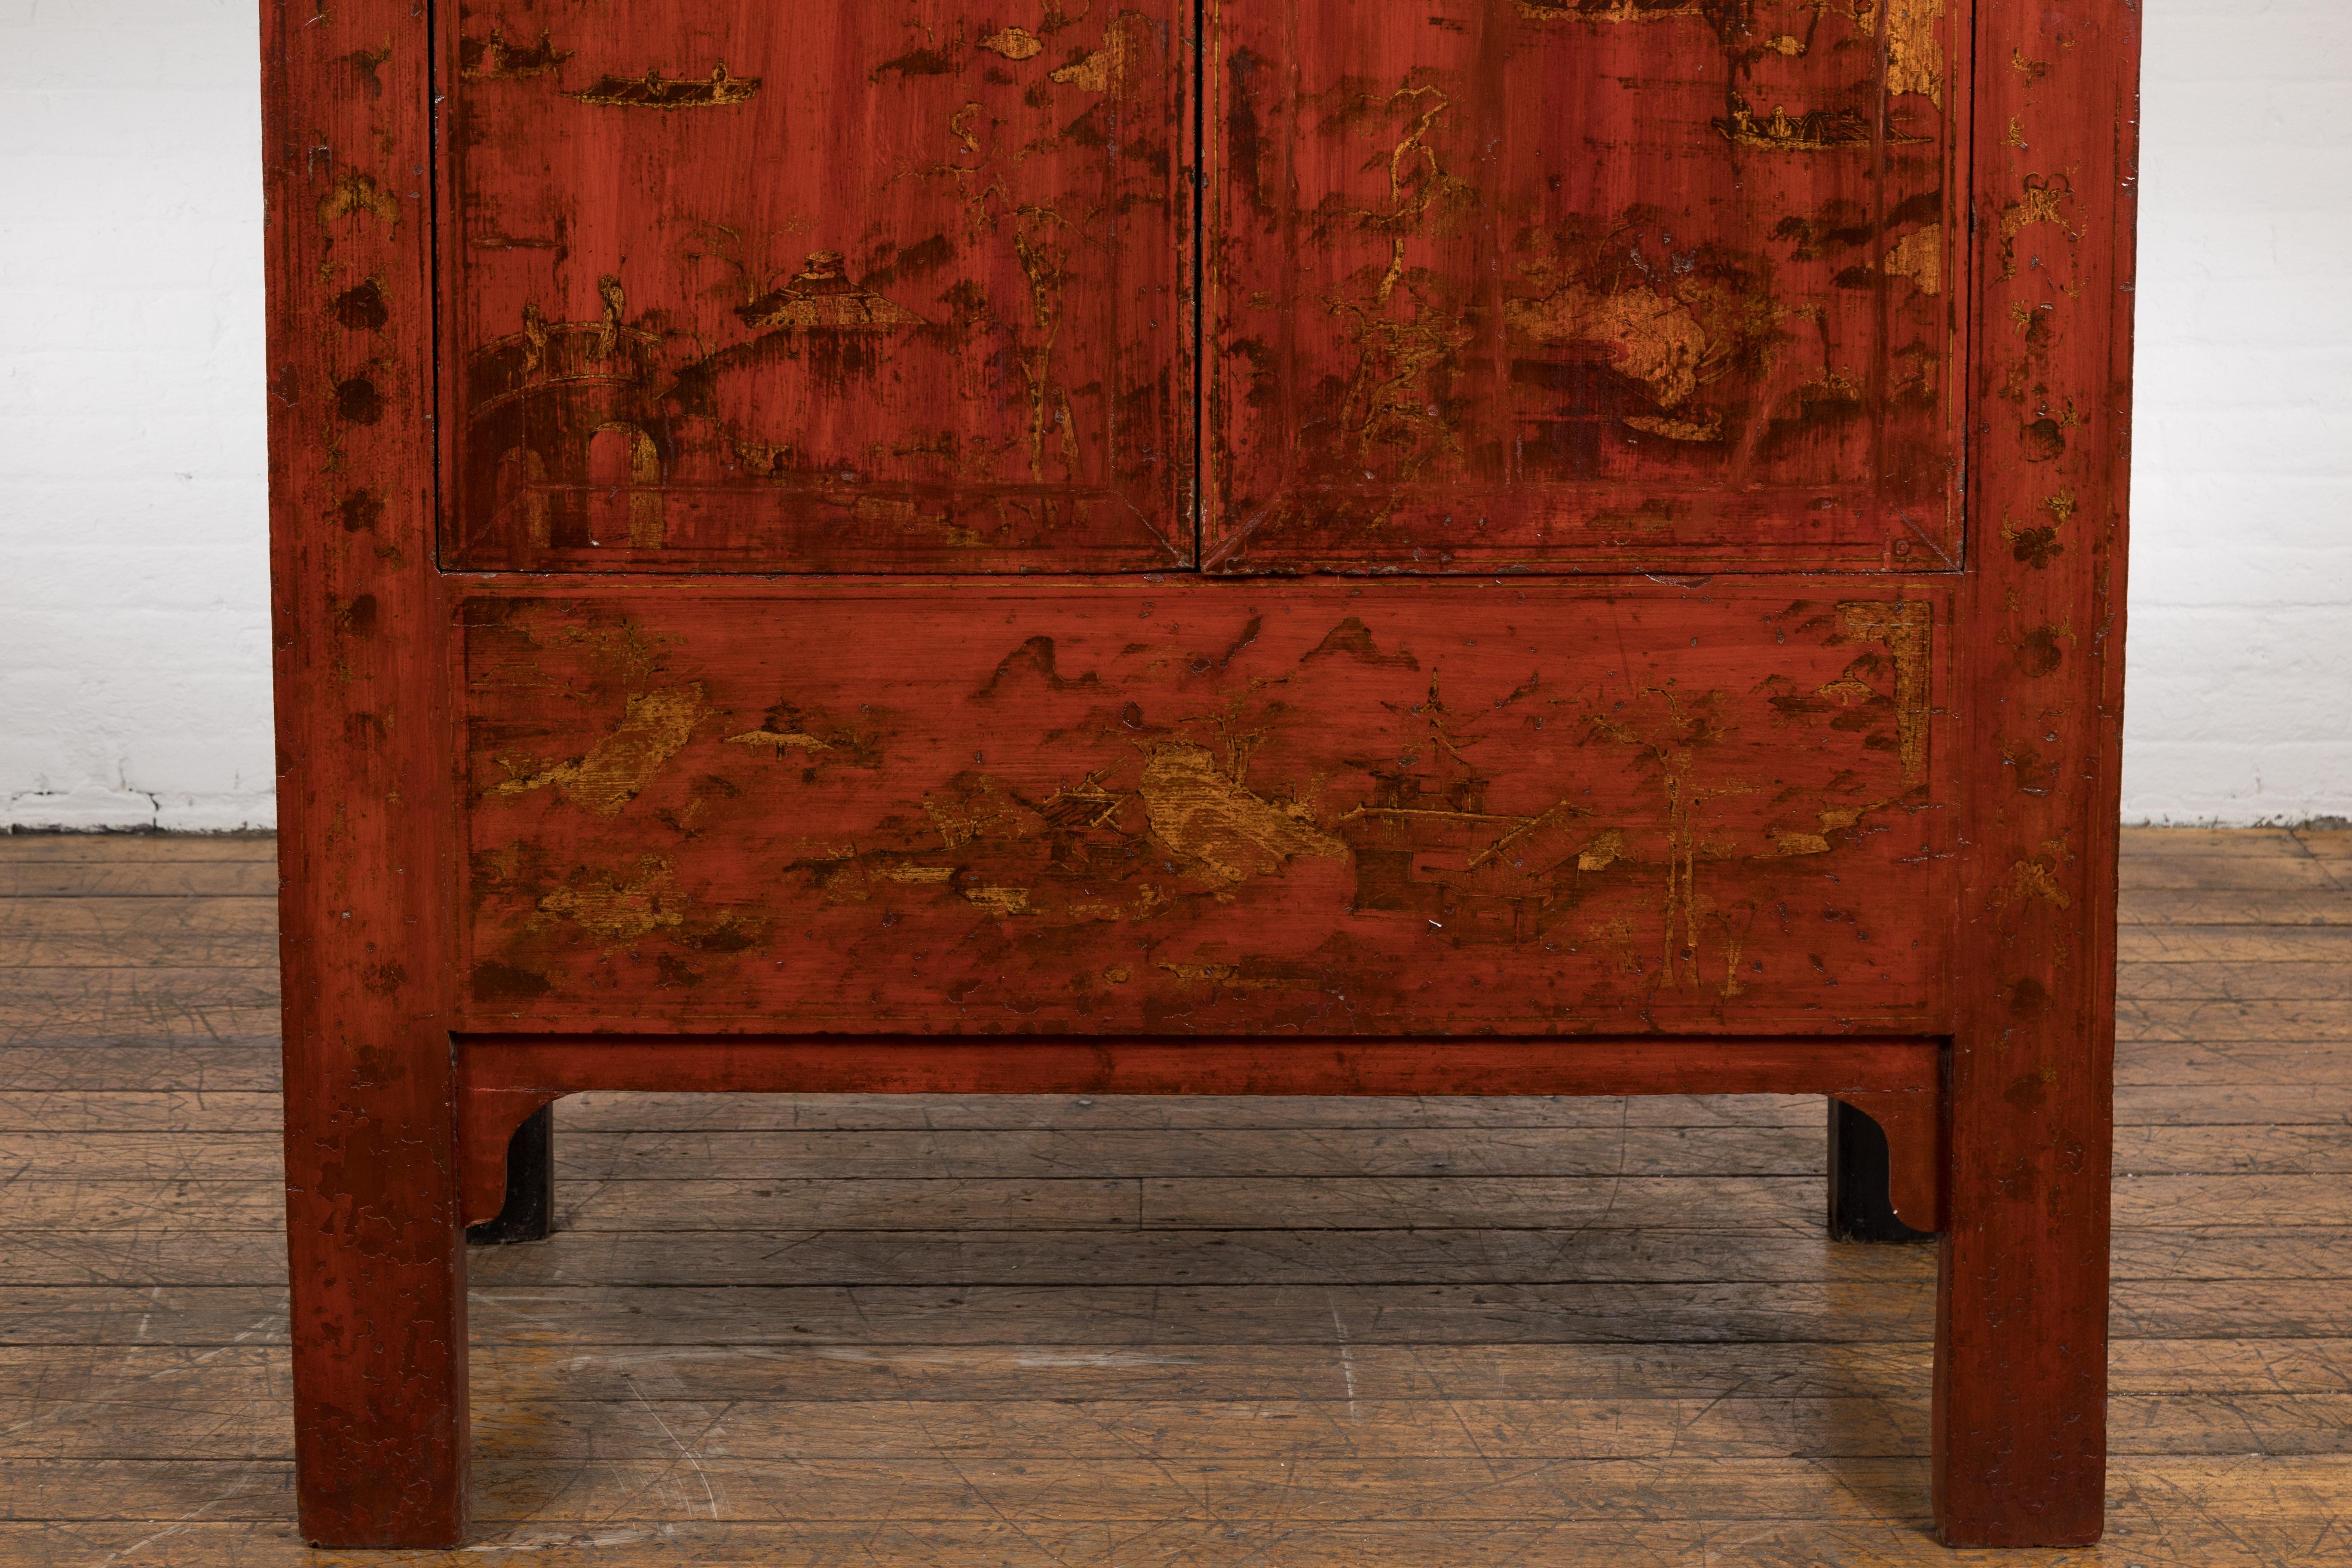 Bronze Large Red Antique Cabinet with Gold Painted Scenes